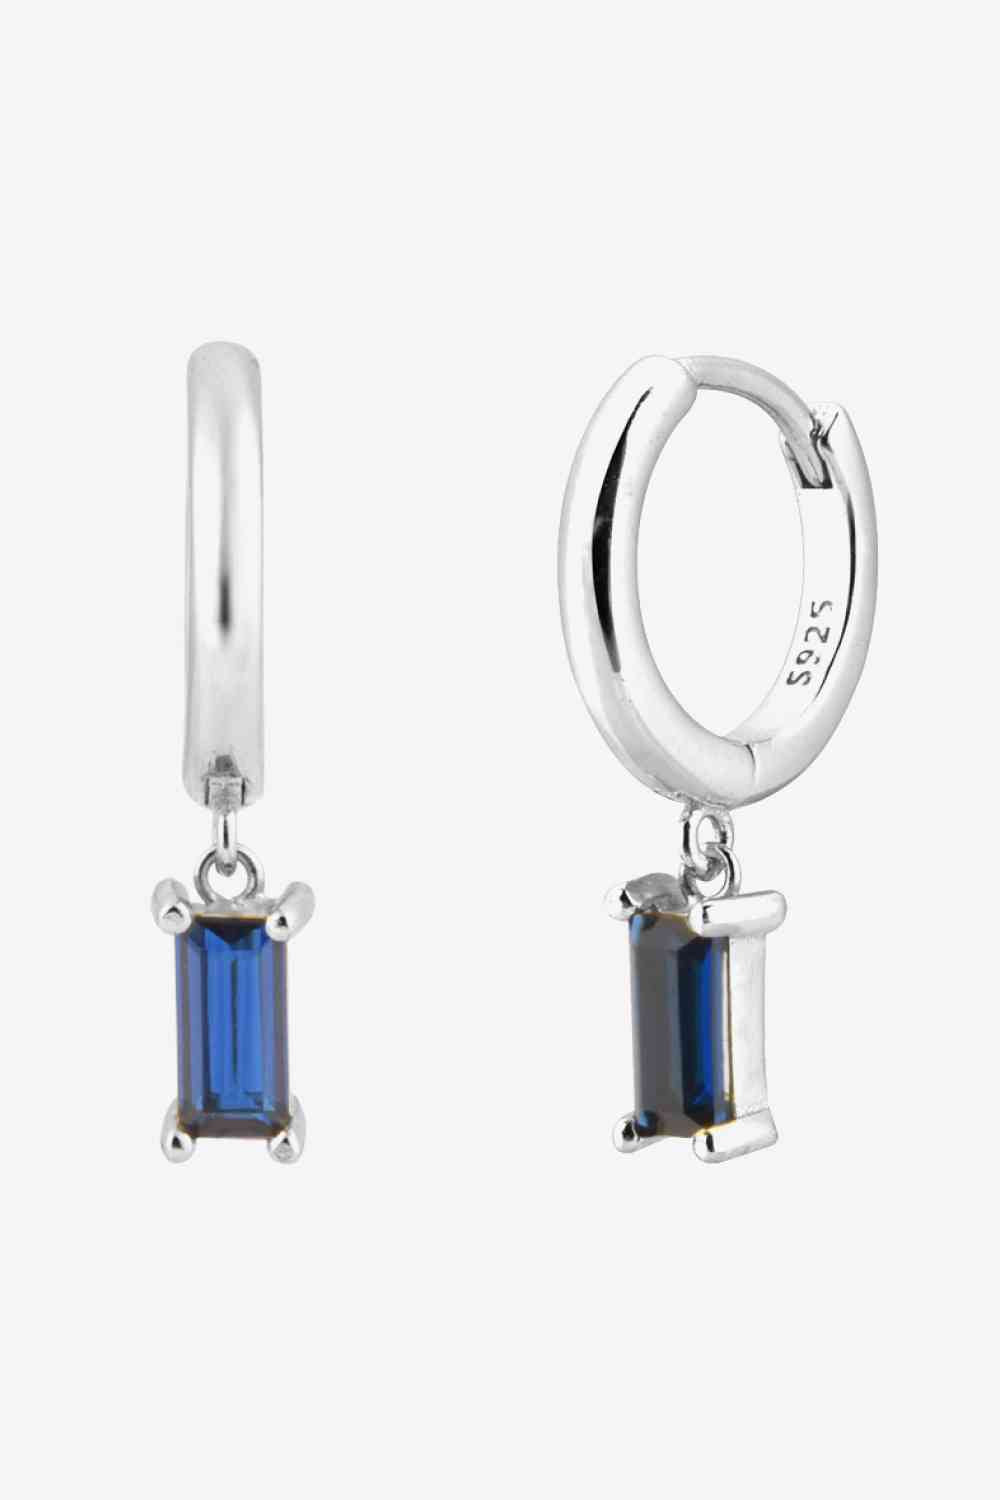 ZIRCON and STERLING SILVER HUGGIE DROP EARRINGS in Platinum or 18K Gold plated finish